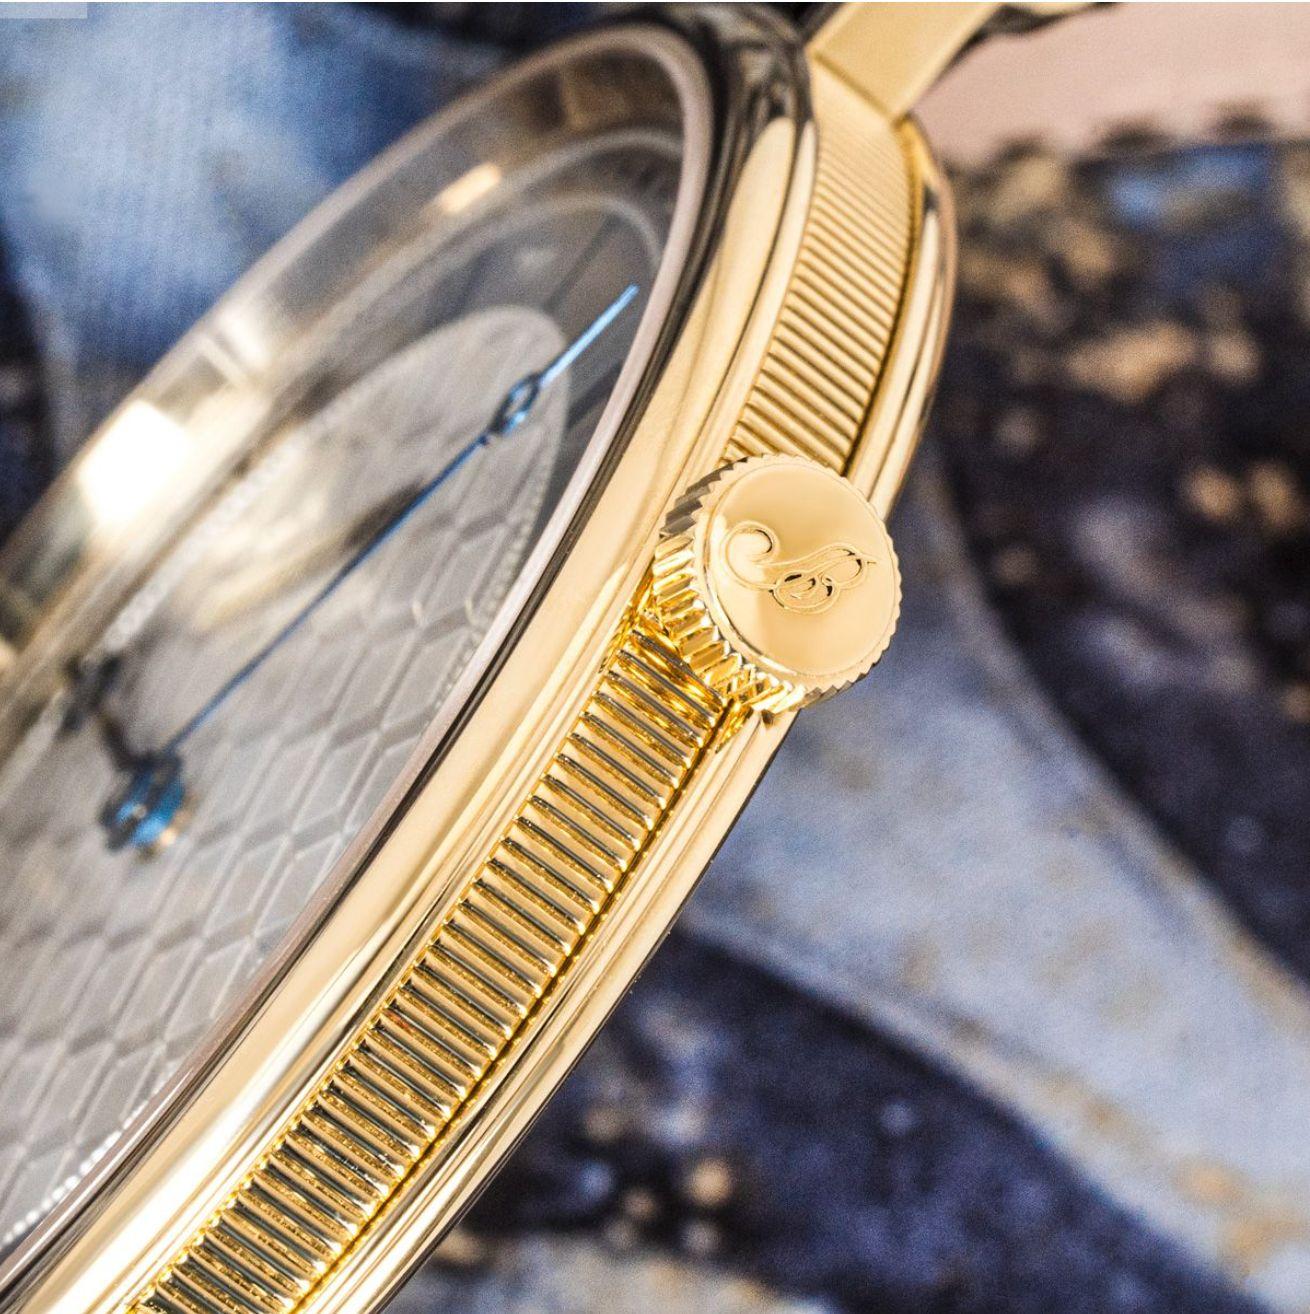 A 41mm extra thin Classique wristwatch by Breguet, crafted in yellow gold. Featuring a silver guilloche dial with blued steel hands and a yellow gold bezel. Fitted with a sapphire glass and a self-winding movement which can be seen by the exhibition